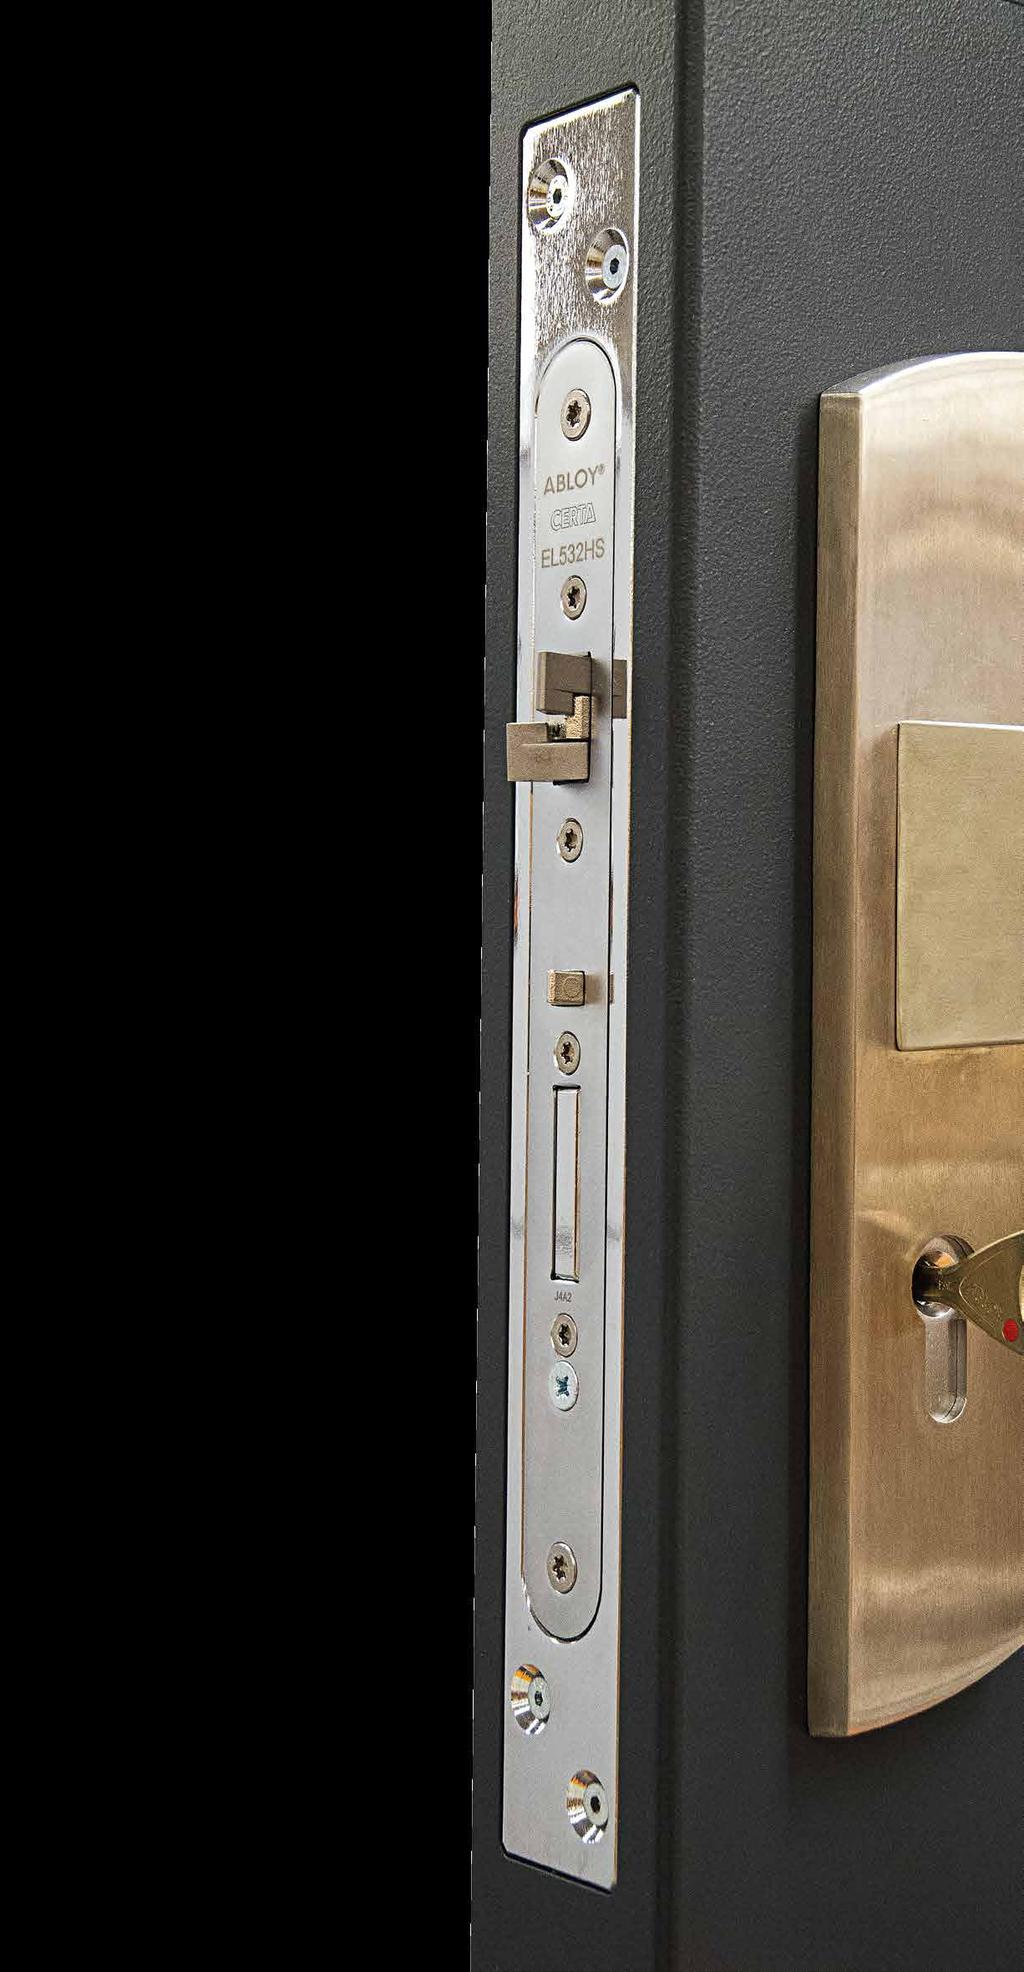 CERTA RANGE HI-SECURITY Hi-Security category locks are suitable for electrically controlled fire rated doors requiring extremely high level of security.